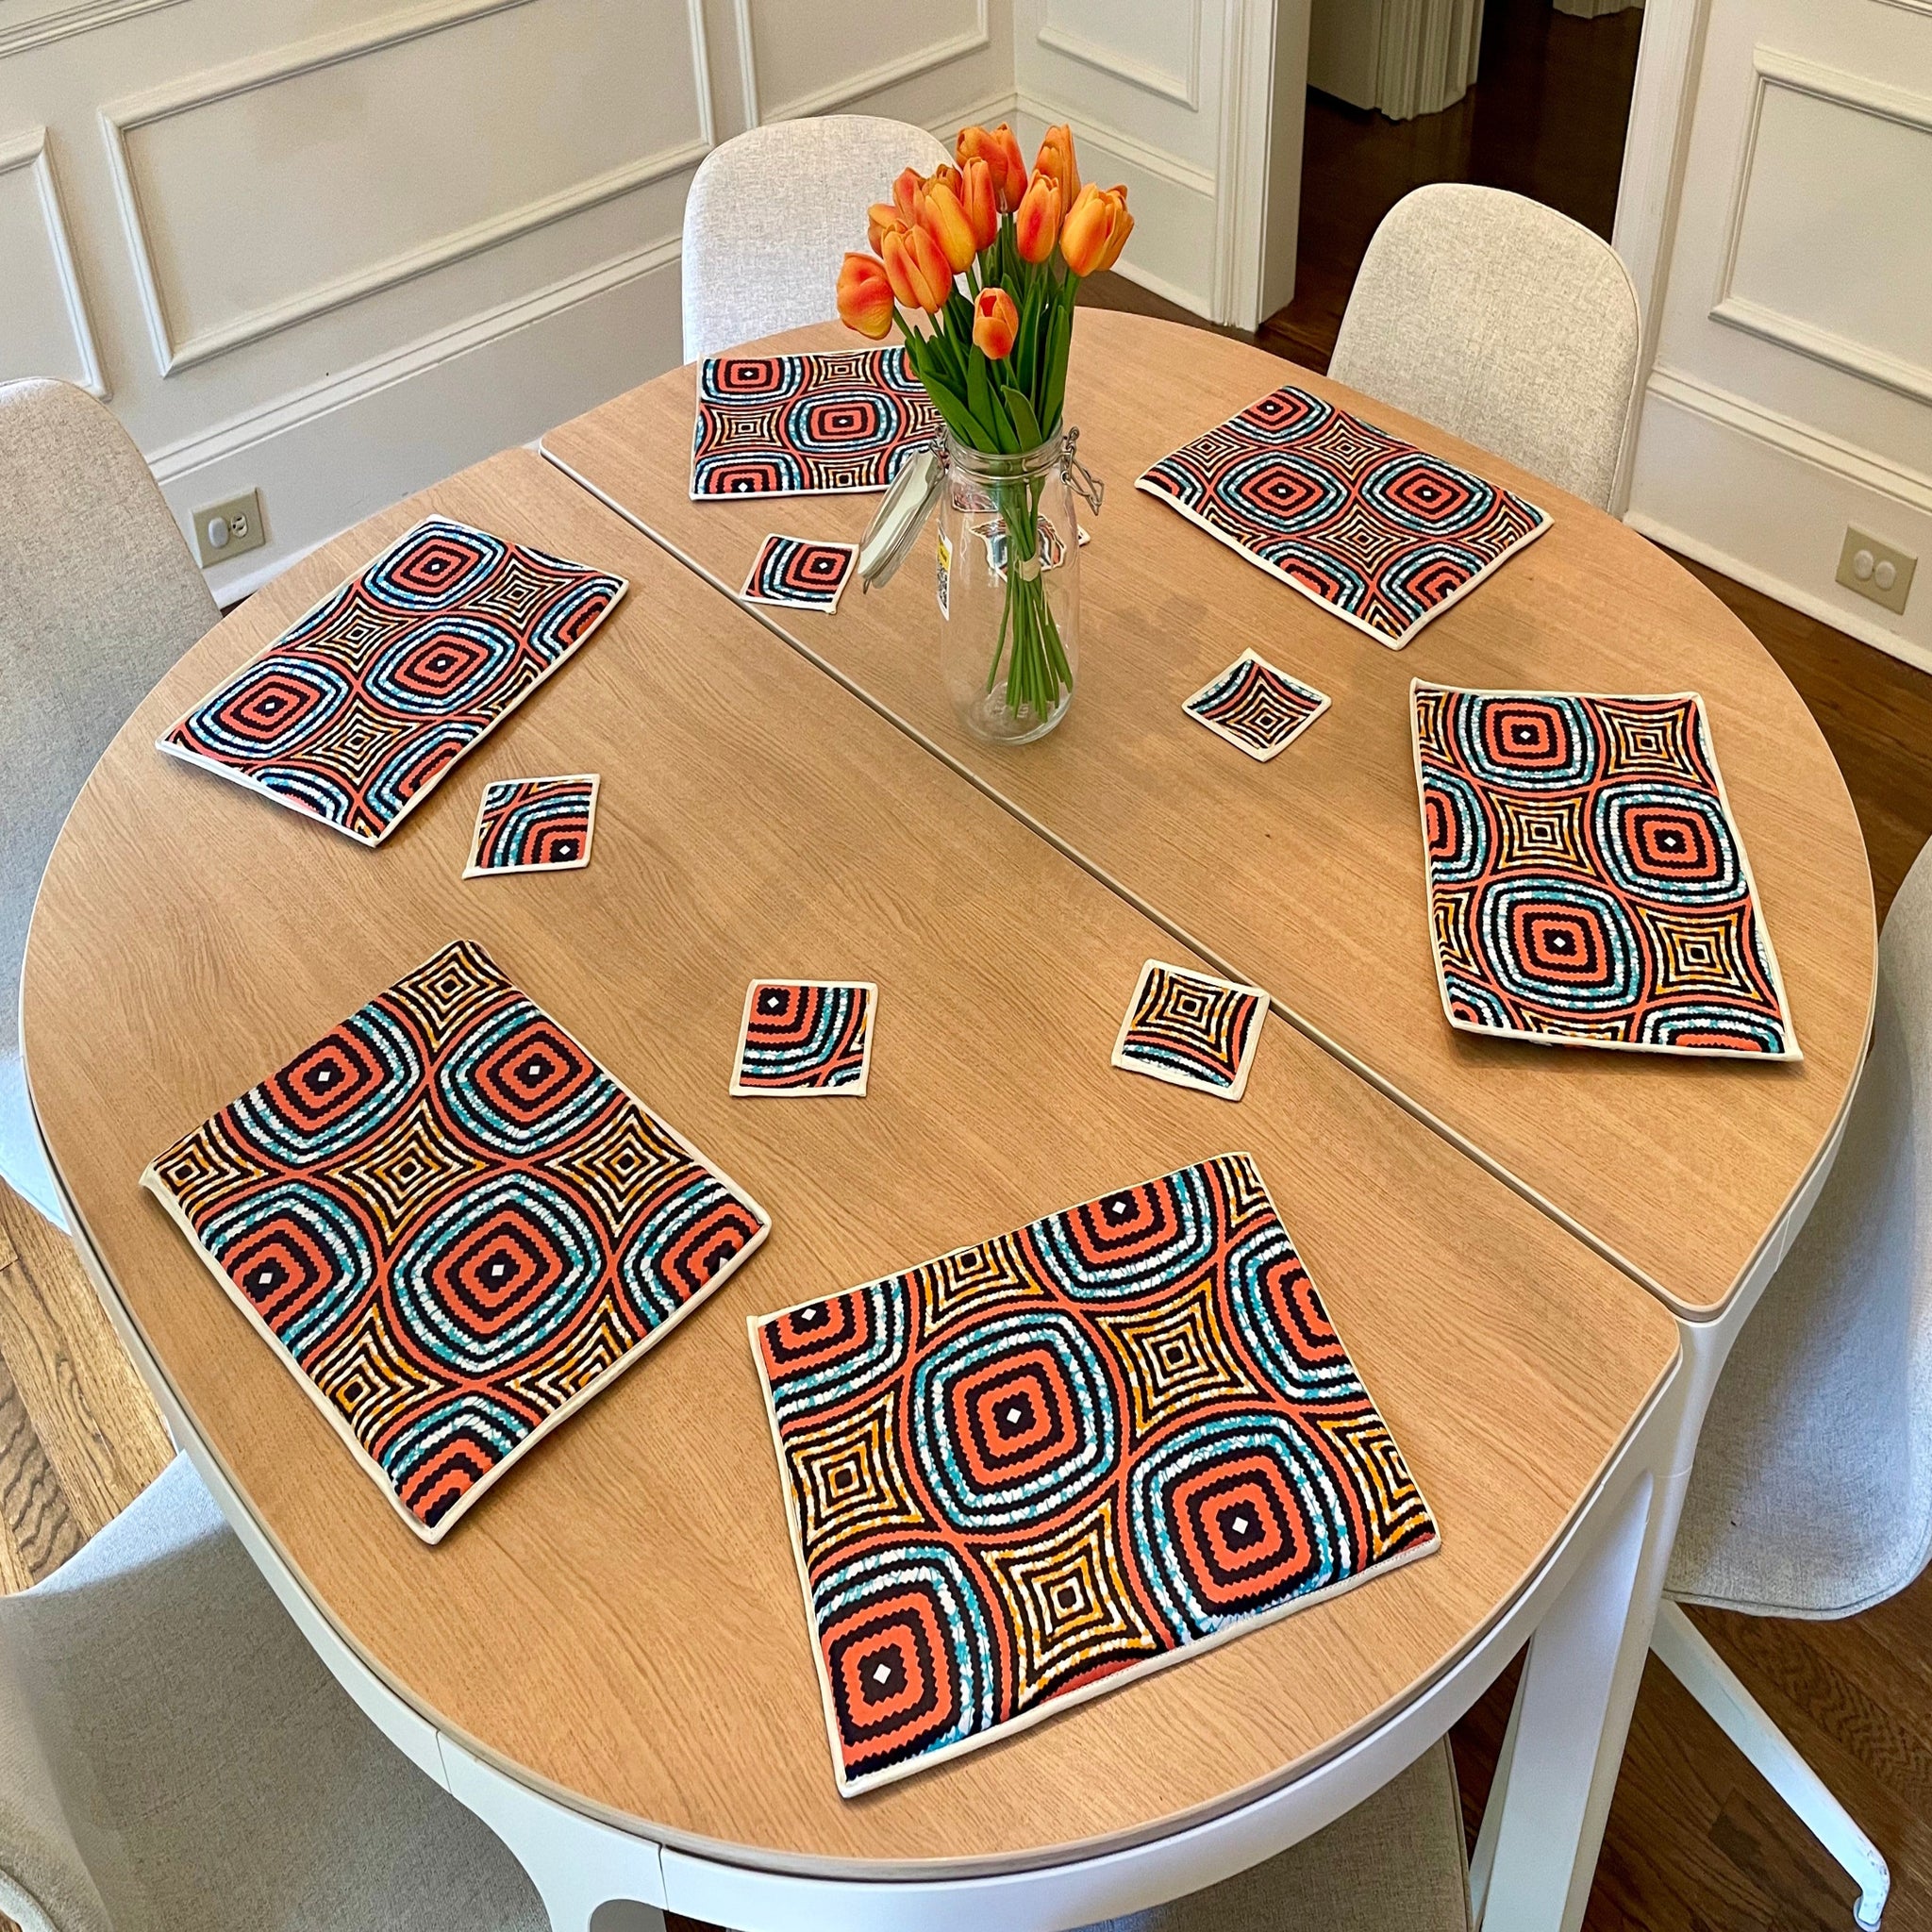 Set of 6 Ankara placemats + coasters from South Africa